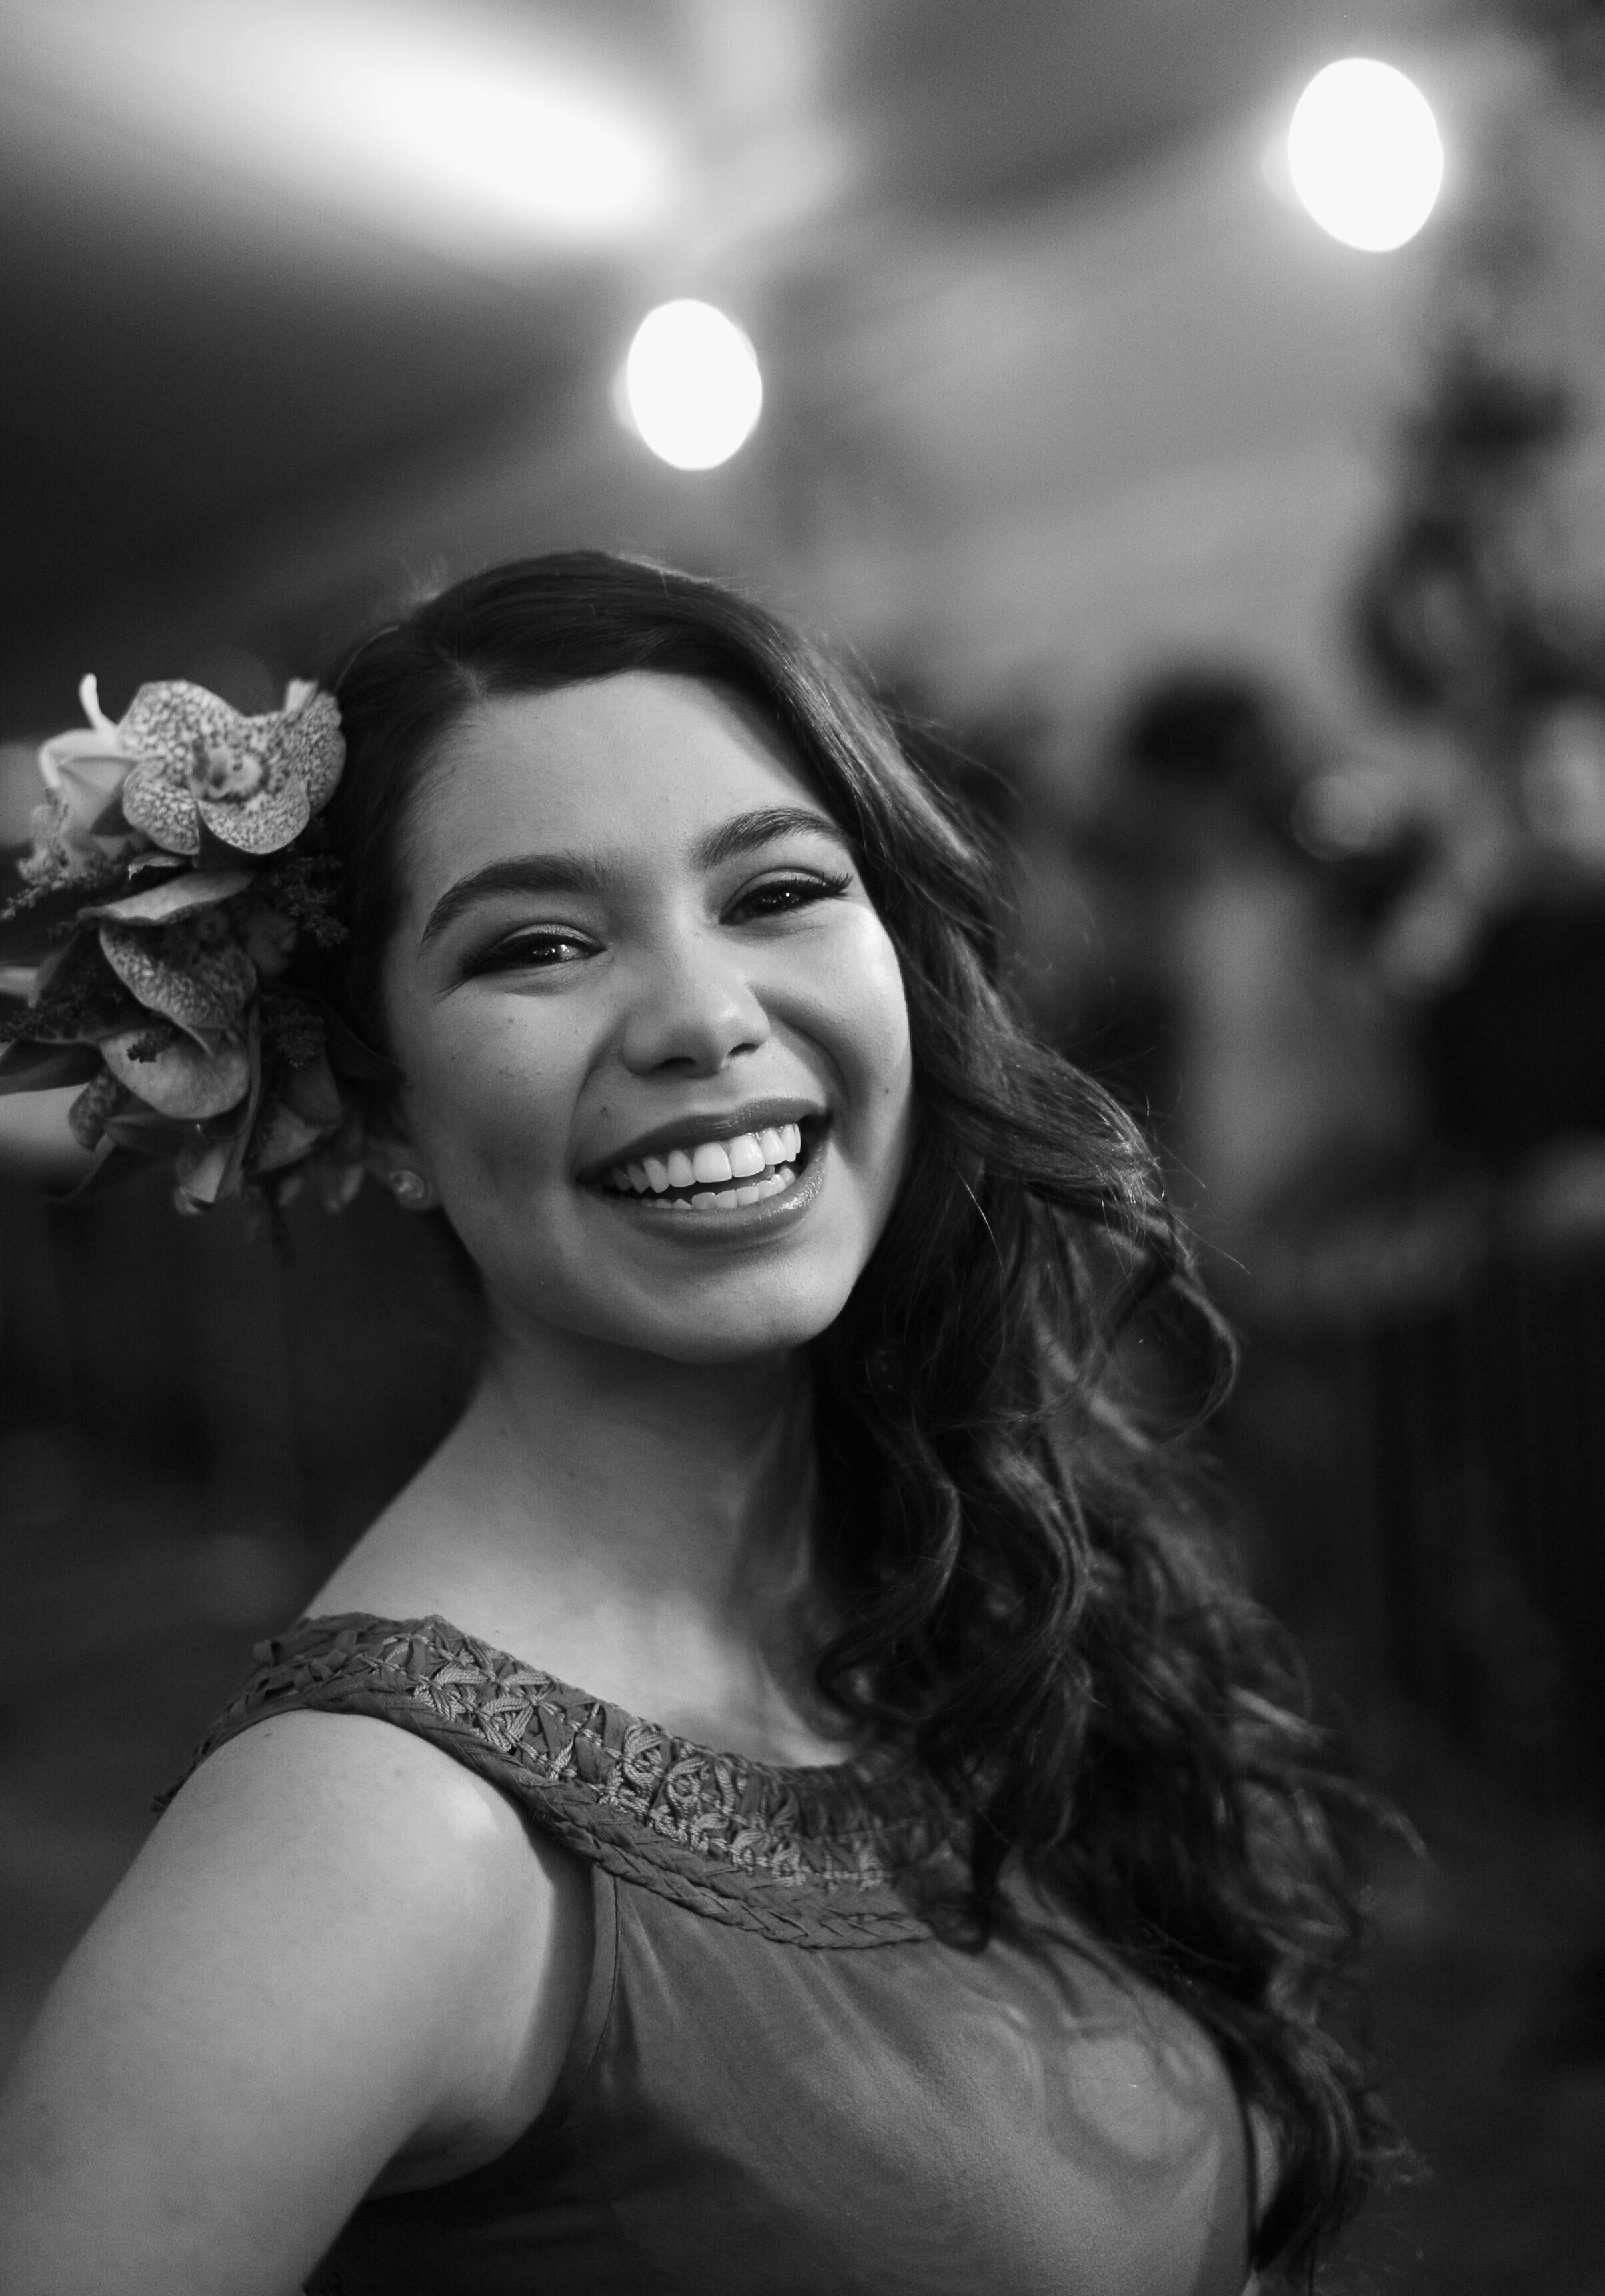 HOLLYWOOD, CA - NOVEMBER 14: (EDITORS NOTE: Image has been shot in black and white. Color version not available.) Actress Auli'i Cravalho attends The World Premiere of Disneys "MOANA" at the El Capitan Theatre on Monday, November 14, 2016 in Hollywood, CA. (Photo by Charley Gallay/Getty Images for Disney) *** Local Caption *** Auli'i Cravalho